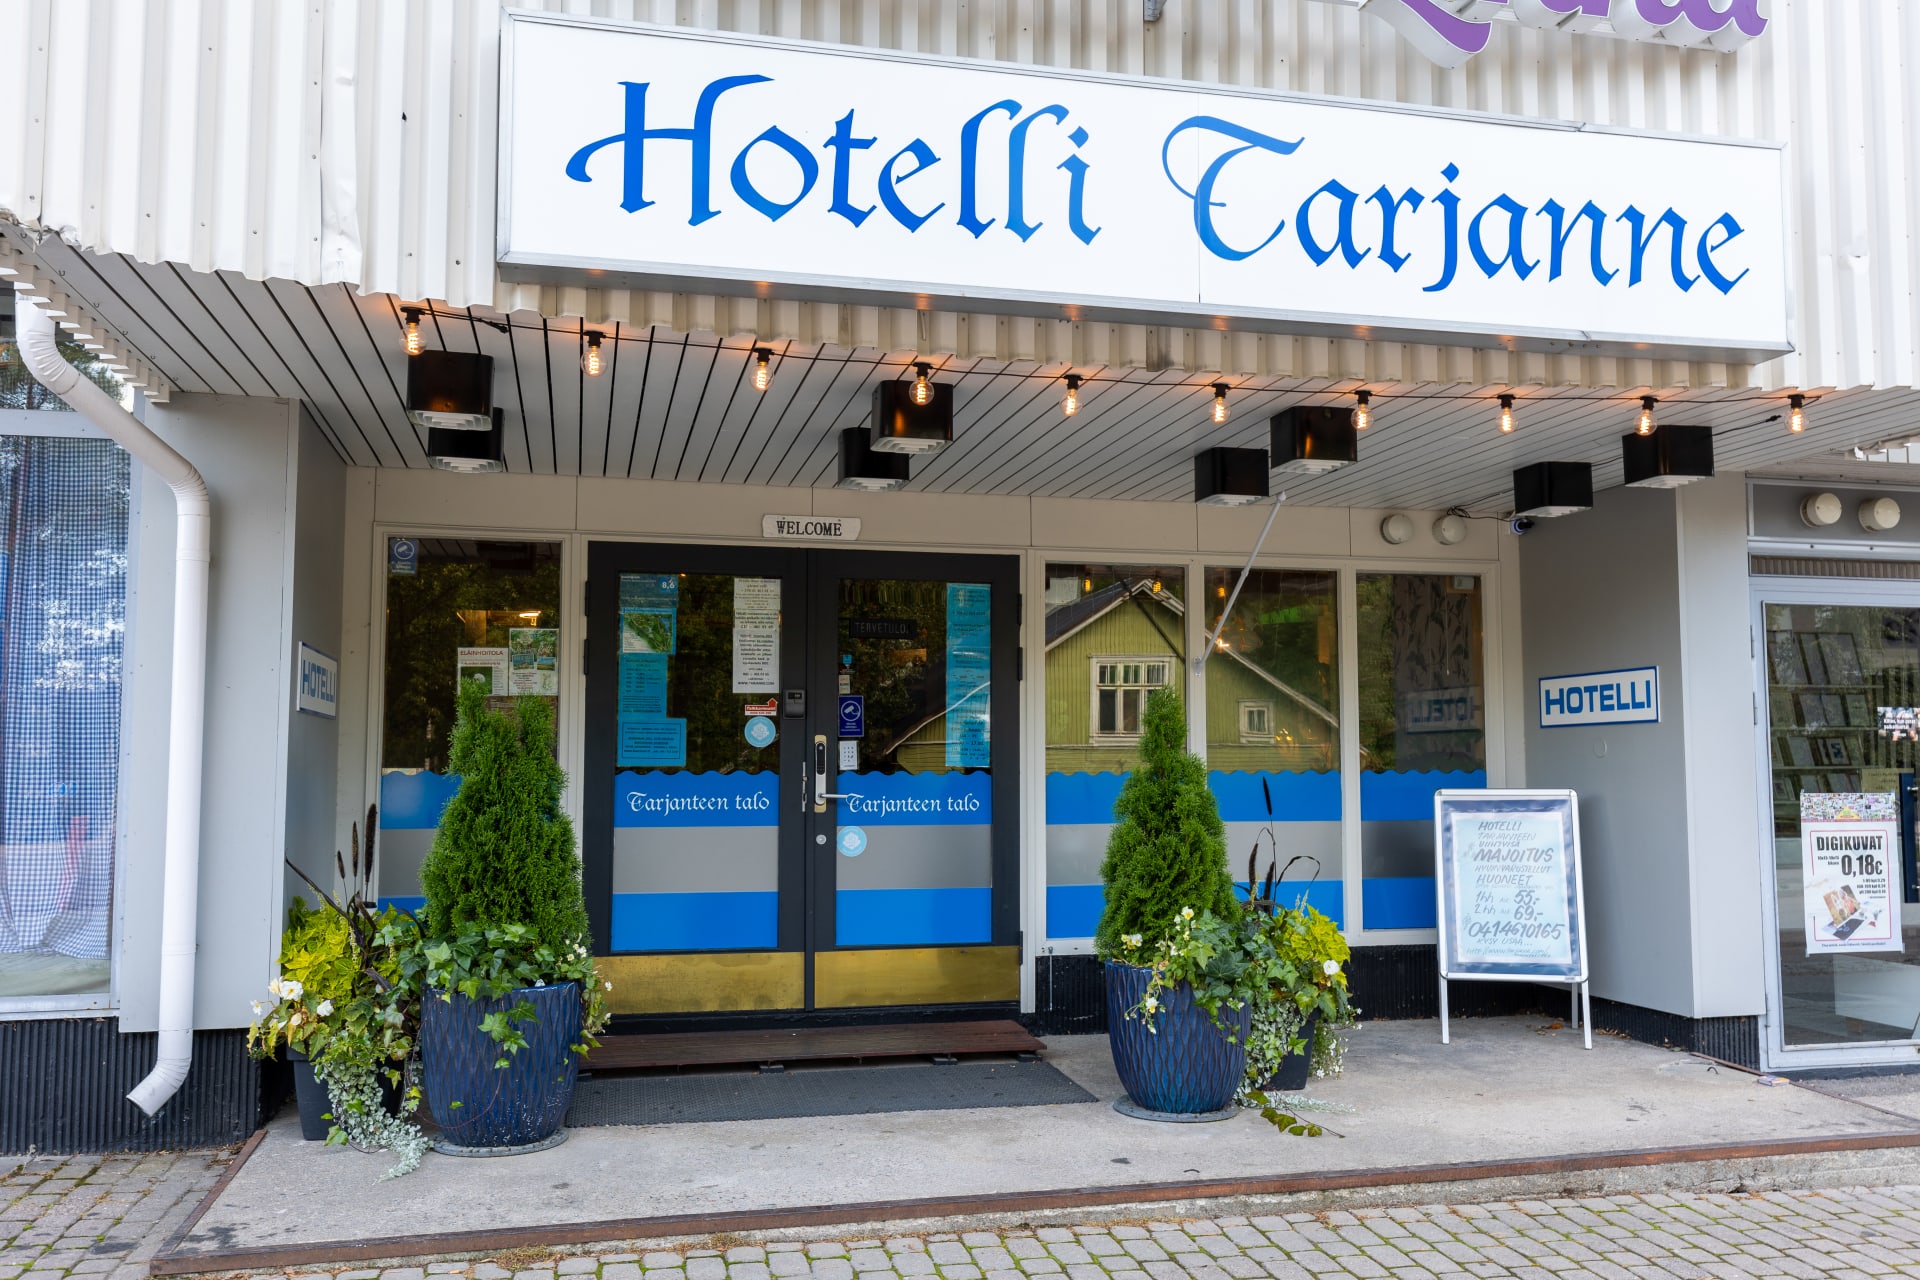 The main entrance of Hotel Tarjanne's accommodation